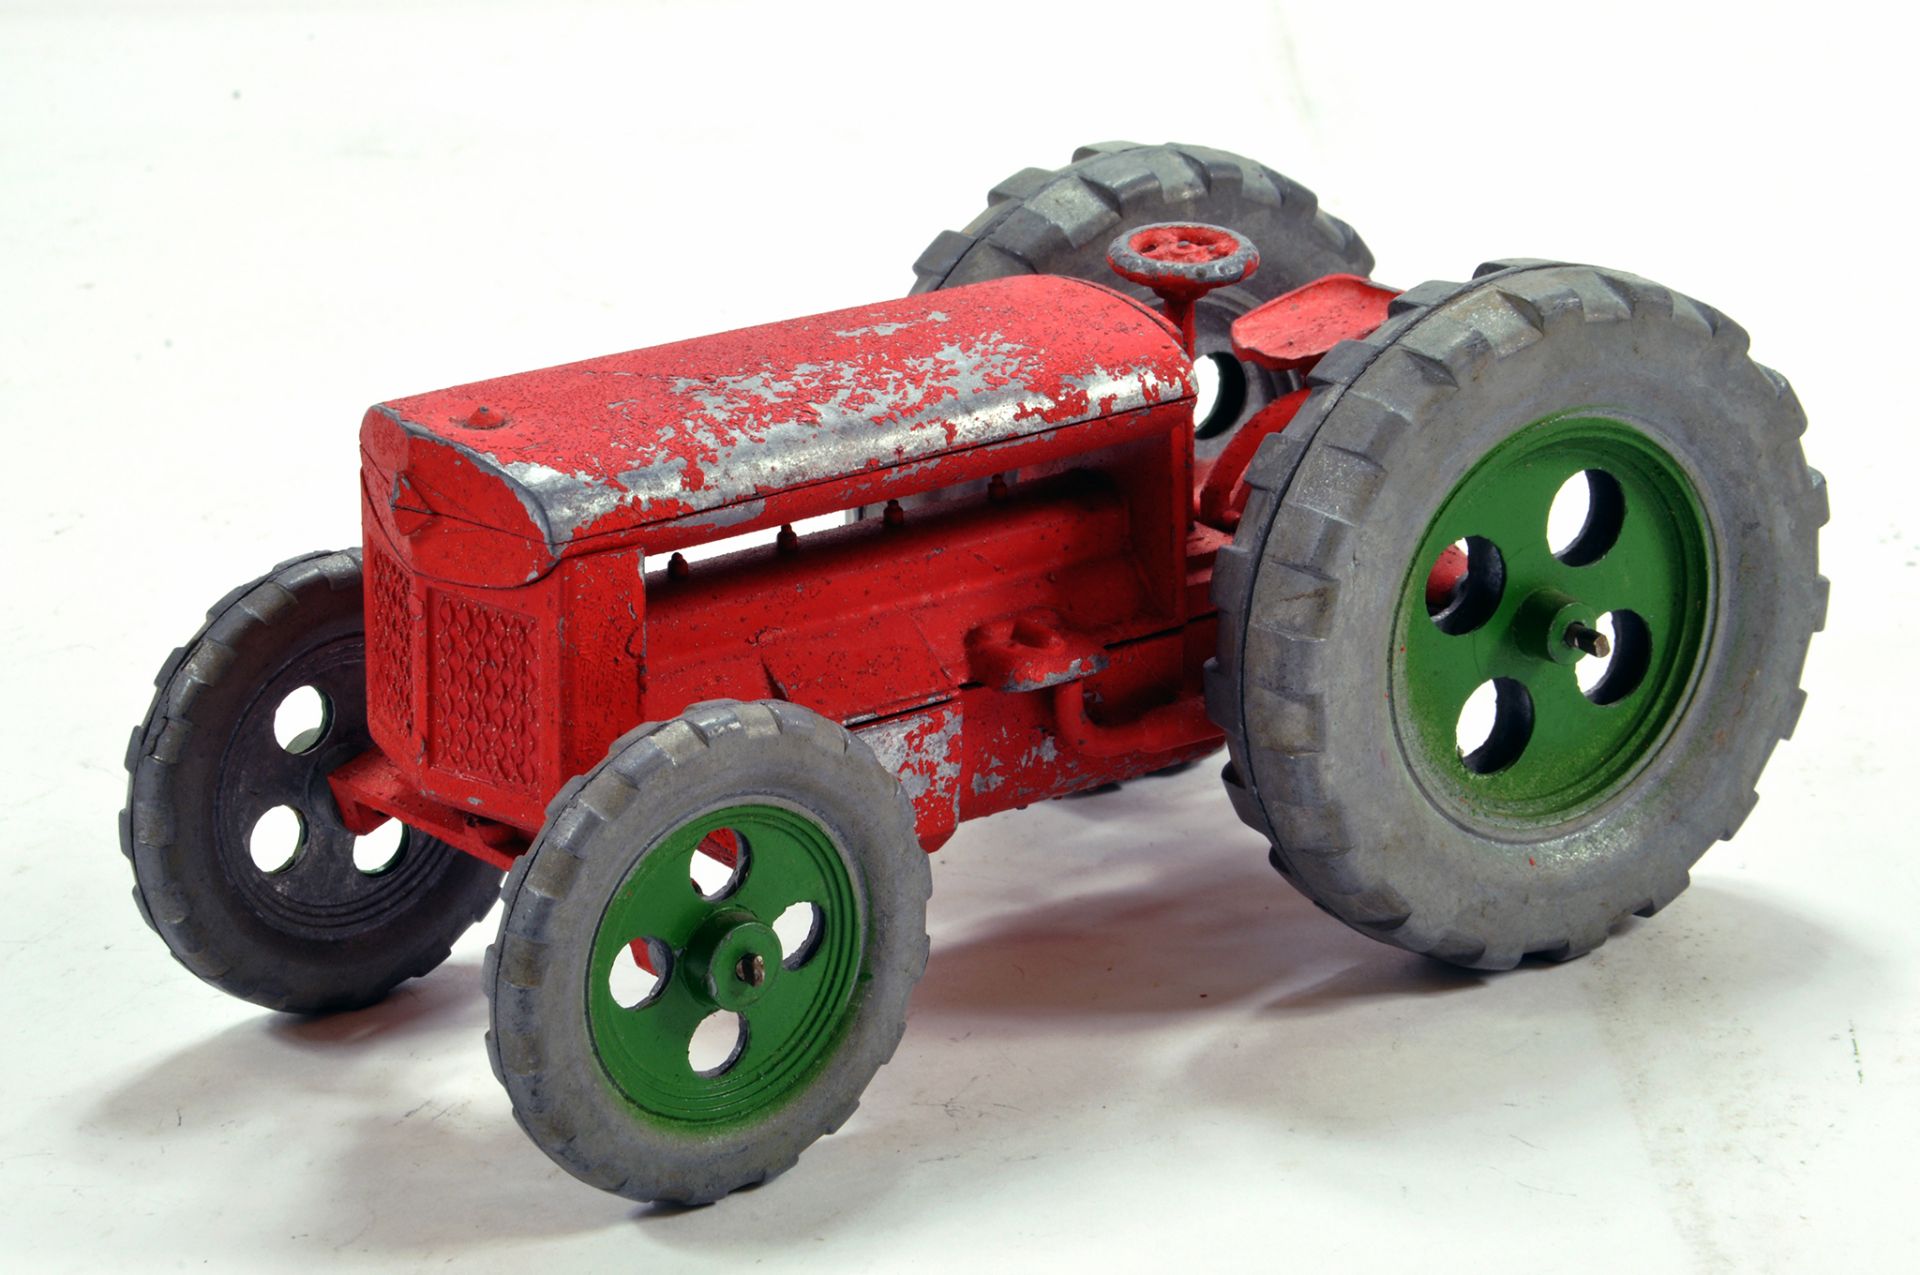 Mears and Son (England) large scale Diecast Metal Farm Tractor. Rare item is G and extremely hard to